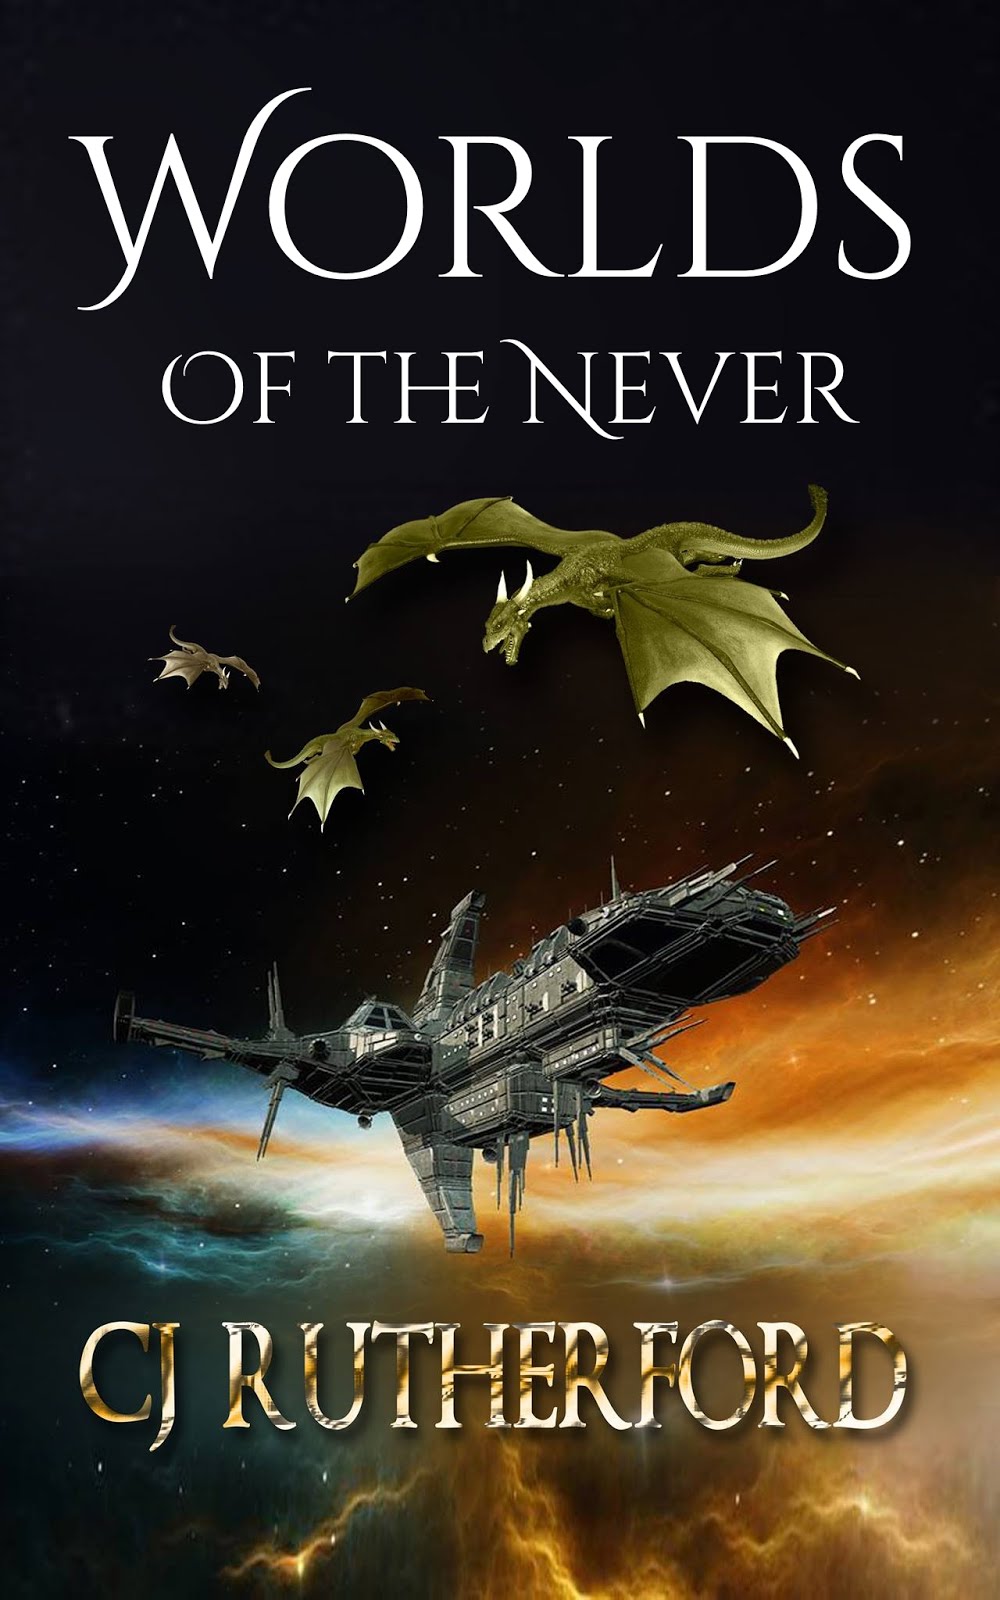 Book two in the Tales of the Neverwar